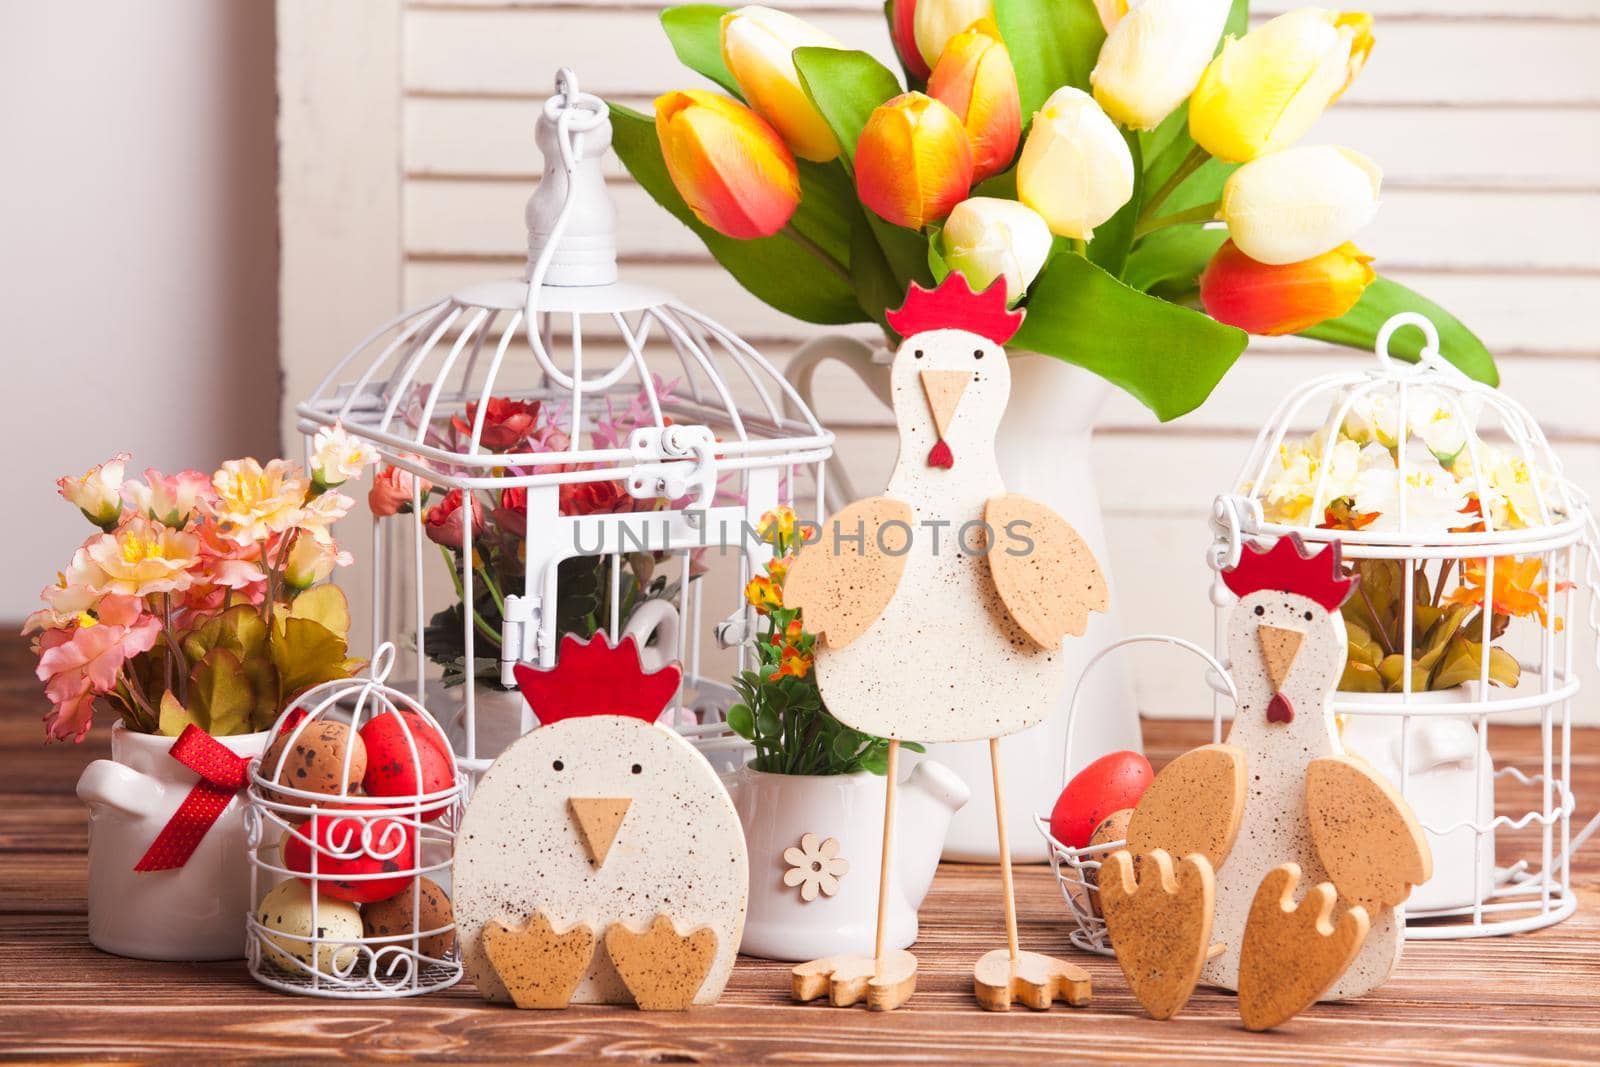 Wooden chickens figures - Easter decorations on the table